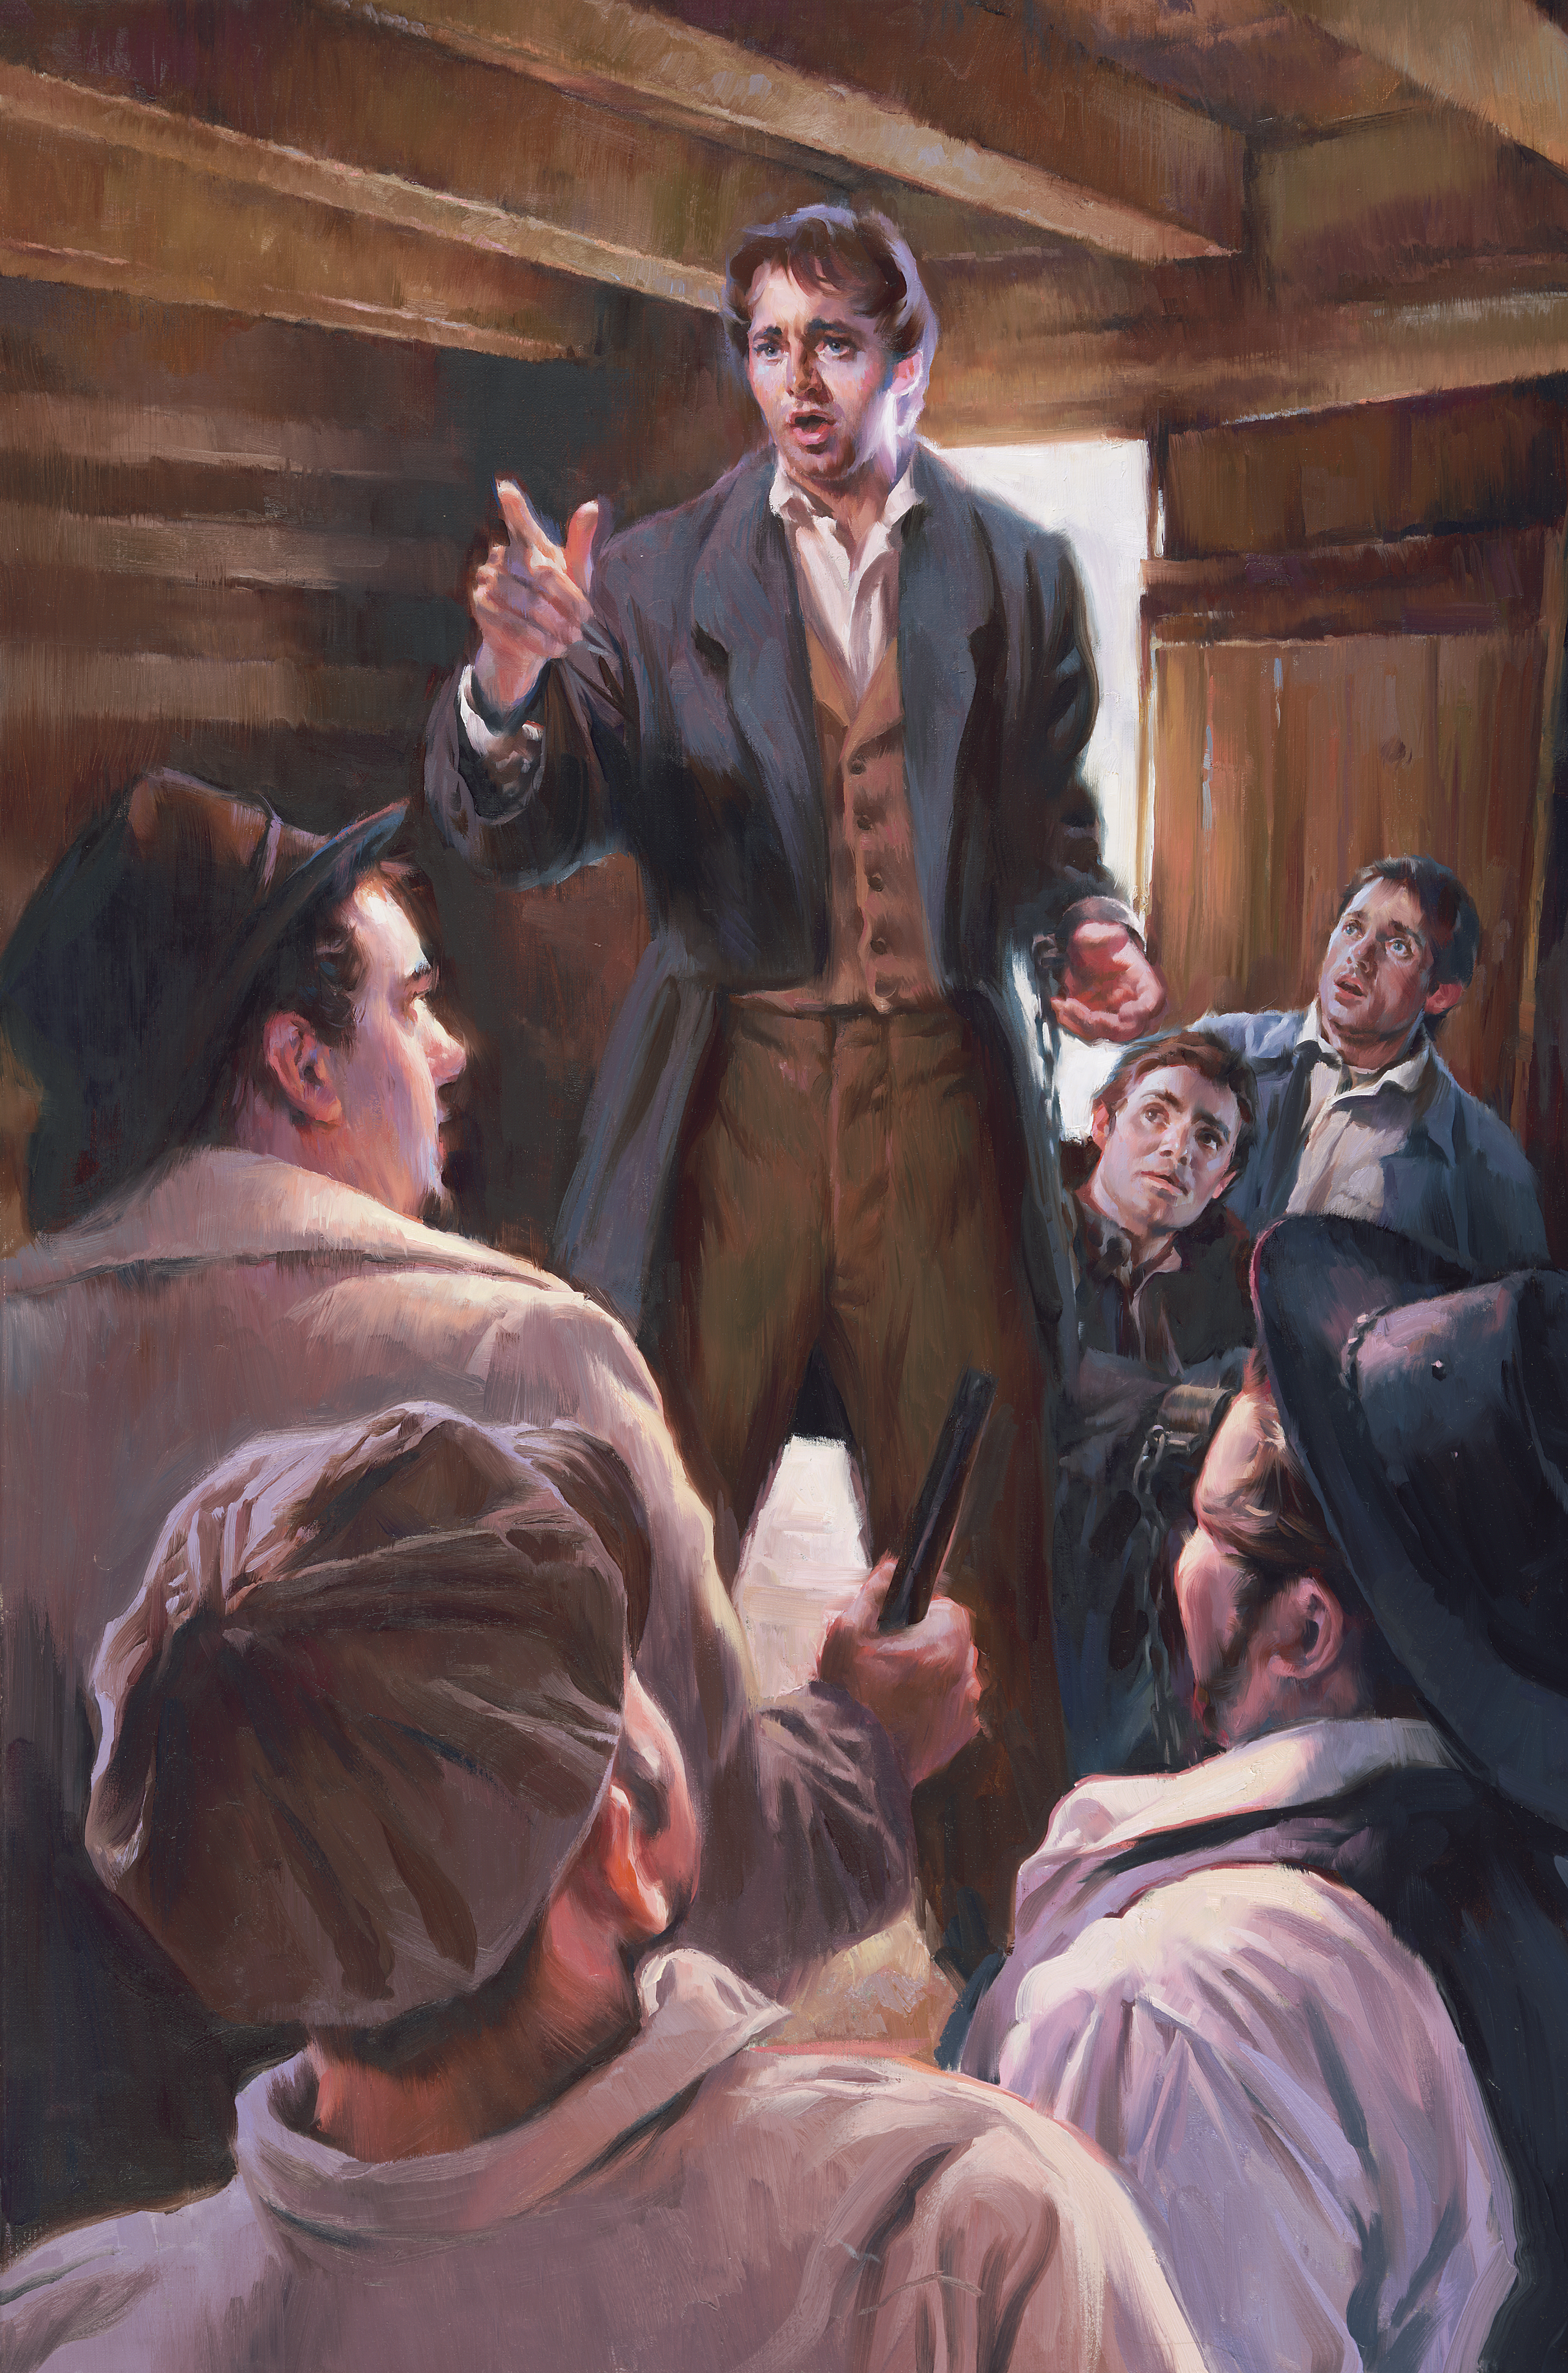 Joseph Smith Rebuking the Guards in Richmond Jail, by Sam Lawlor